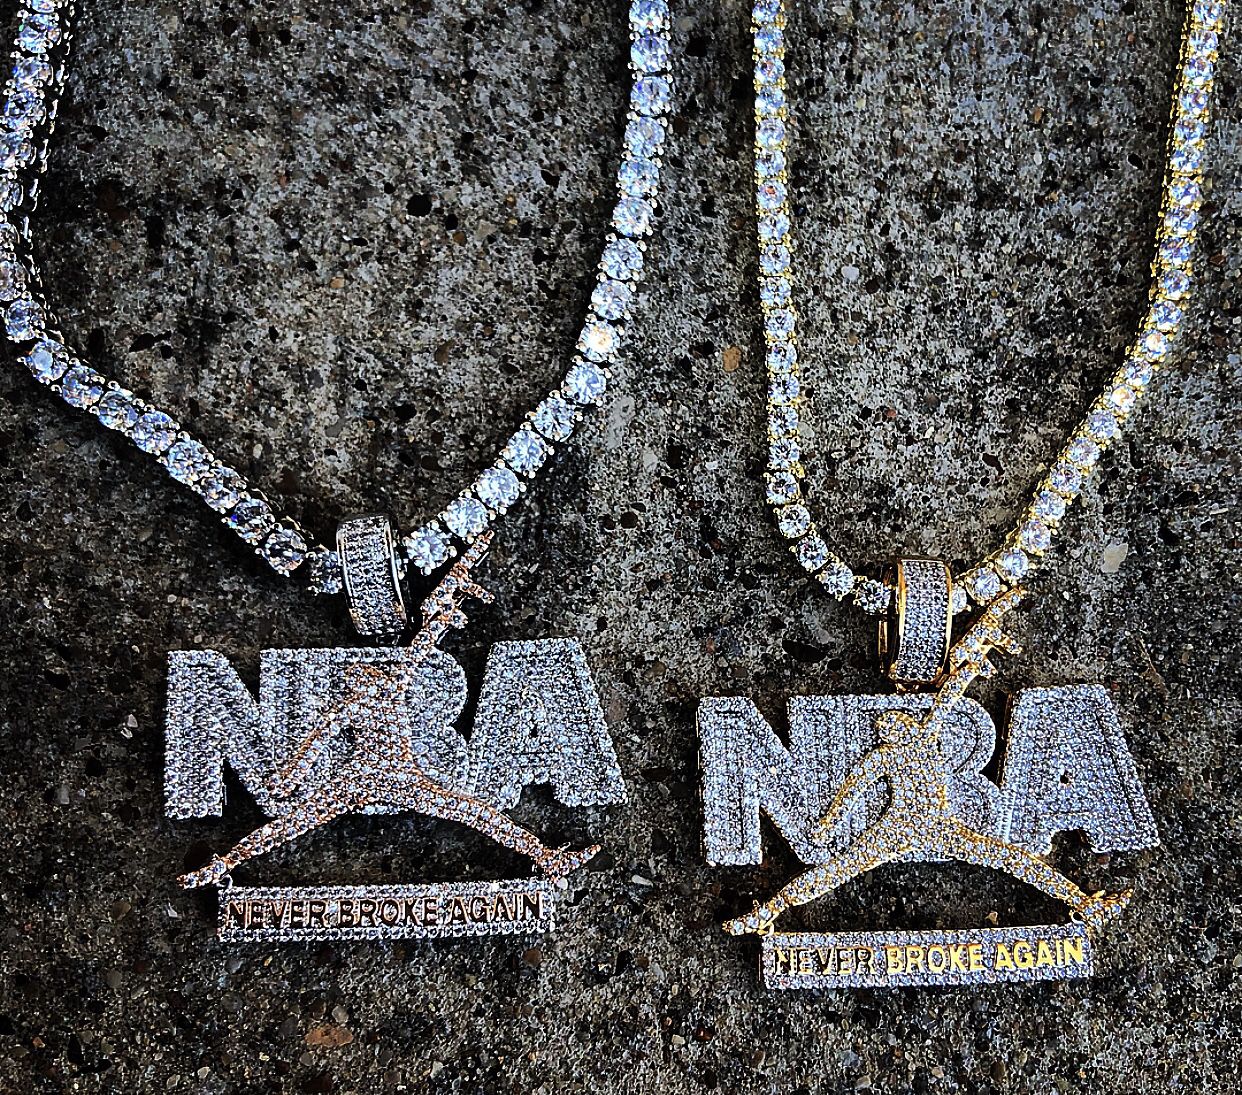 nba chain necklace